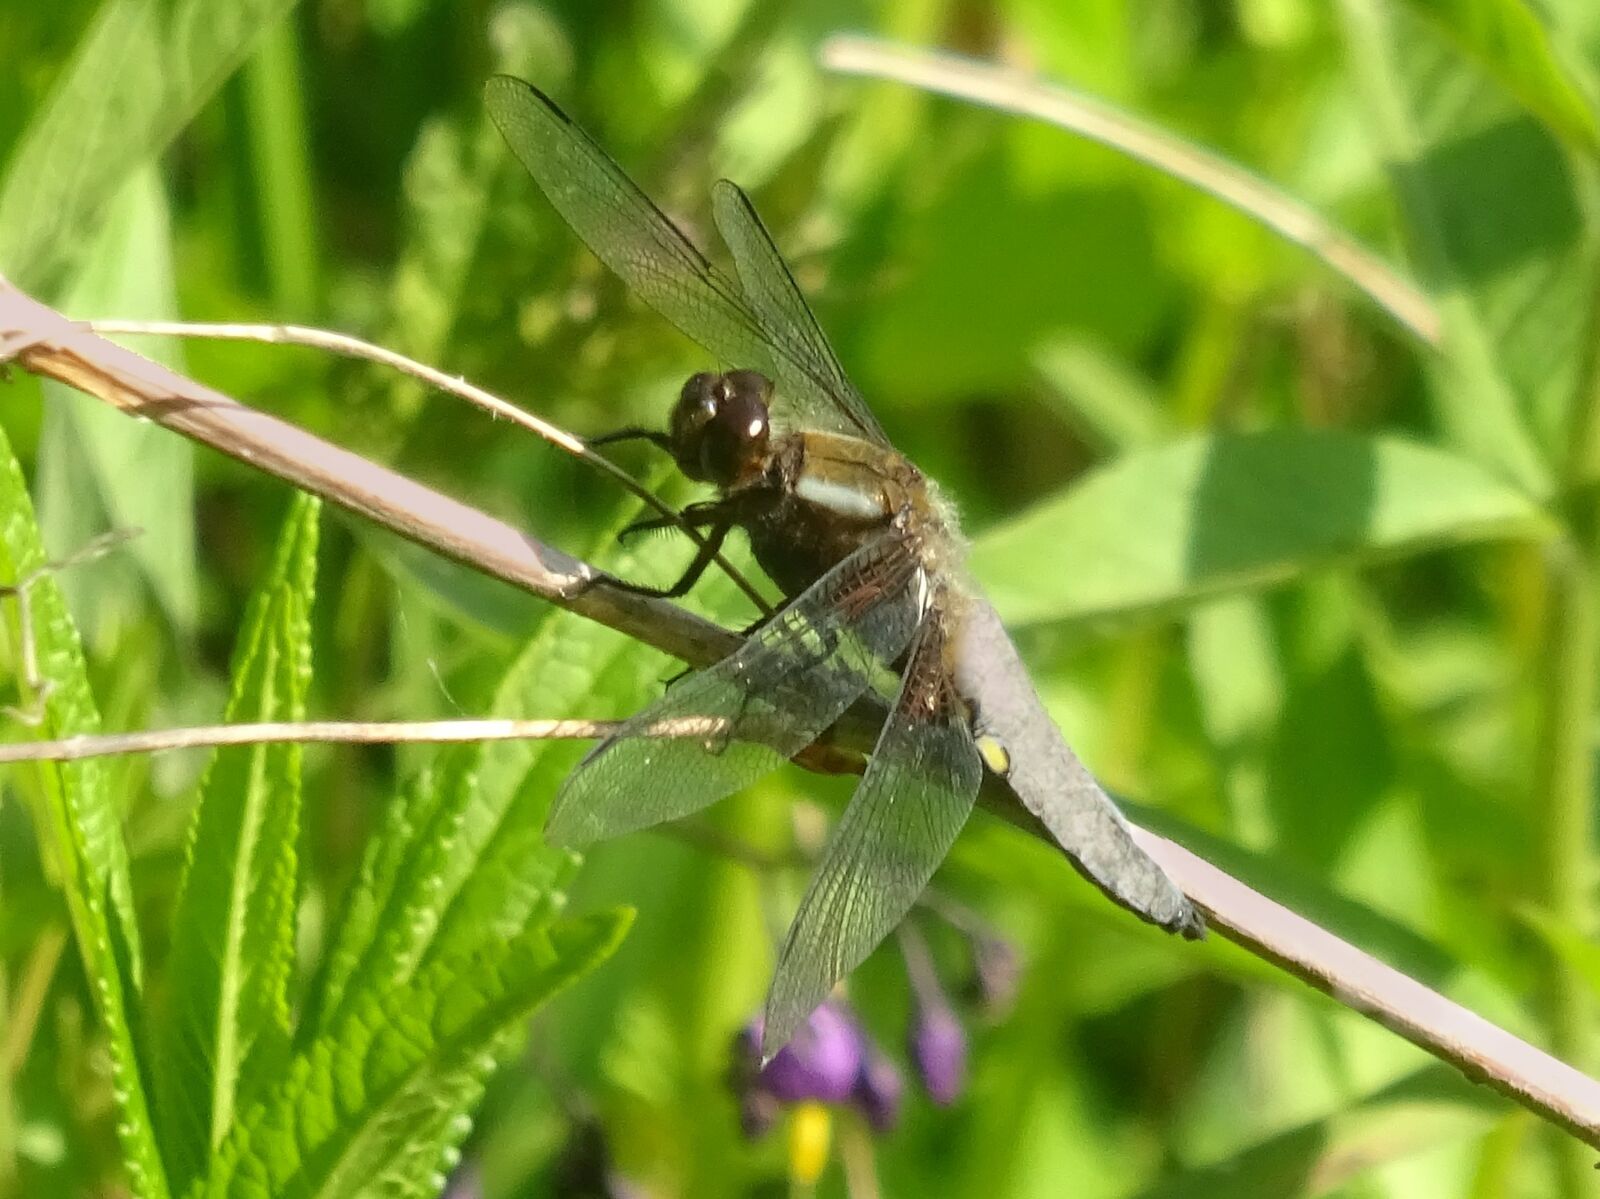 Sony Cyber-shot DSC-WX350 sample photo. Dragonfly, bug, nature photography